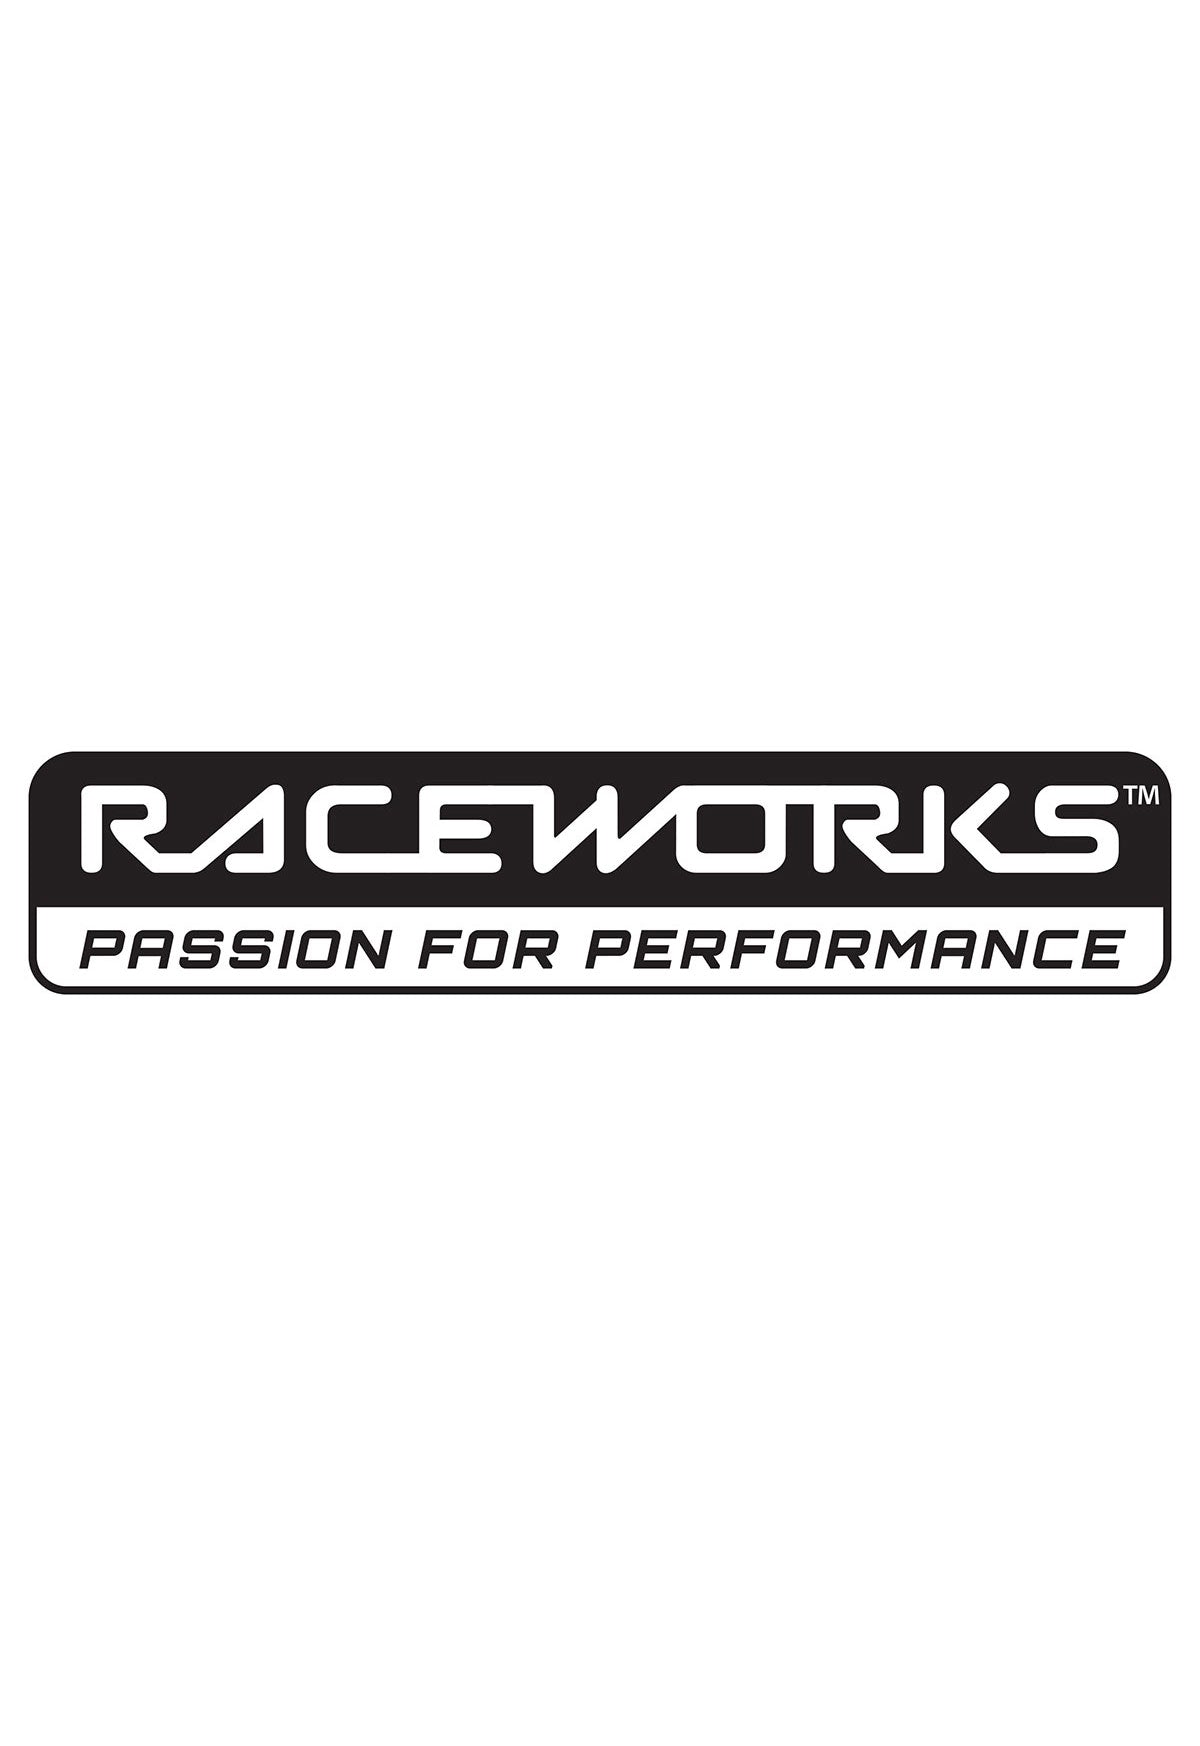 Raceworks Passion For Performance Sticker B&W 700mm X 160mm